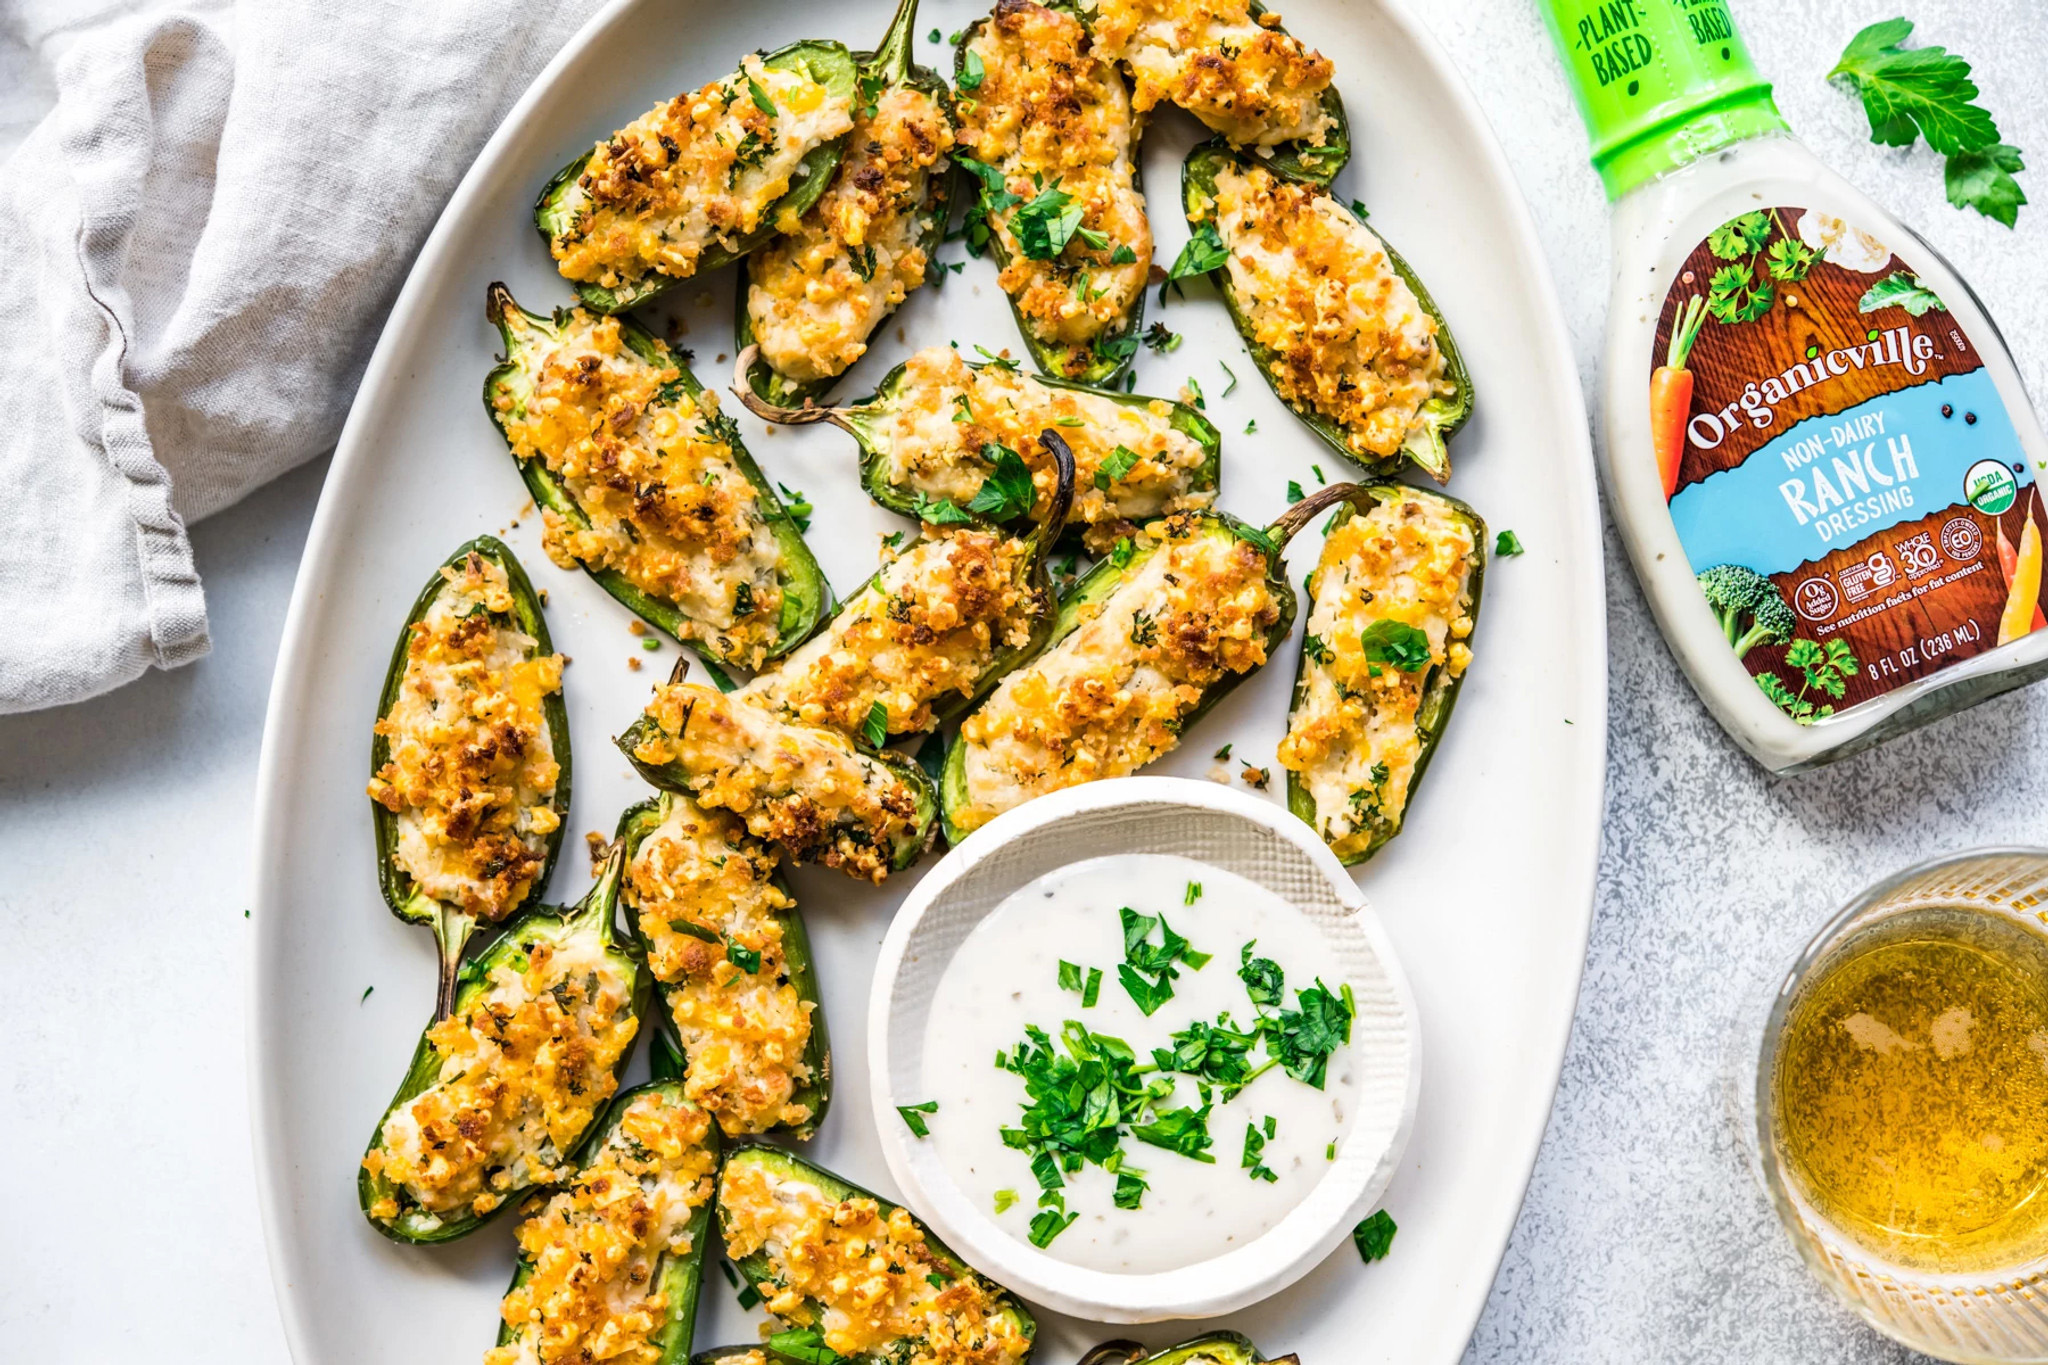 Organicville ranch in bowl with vegan jalepeno poppers